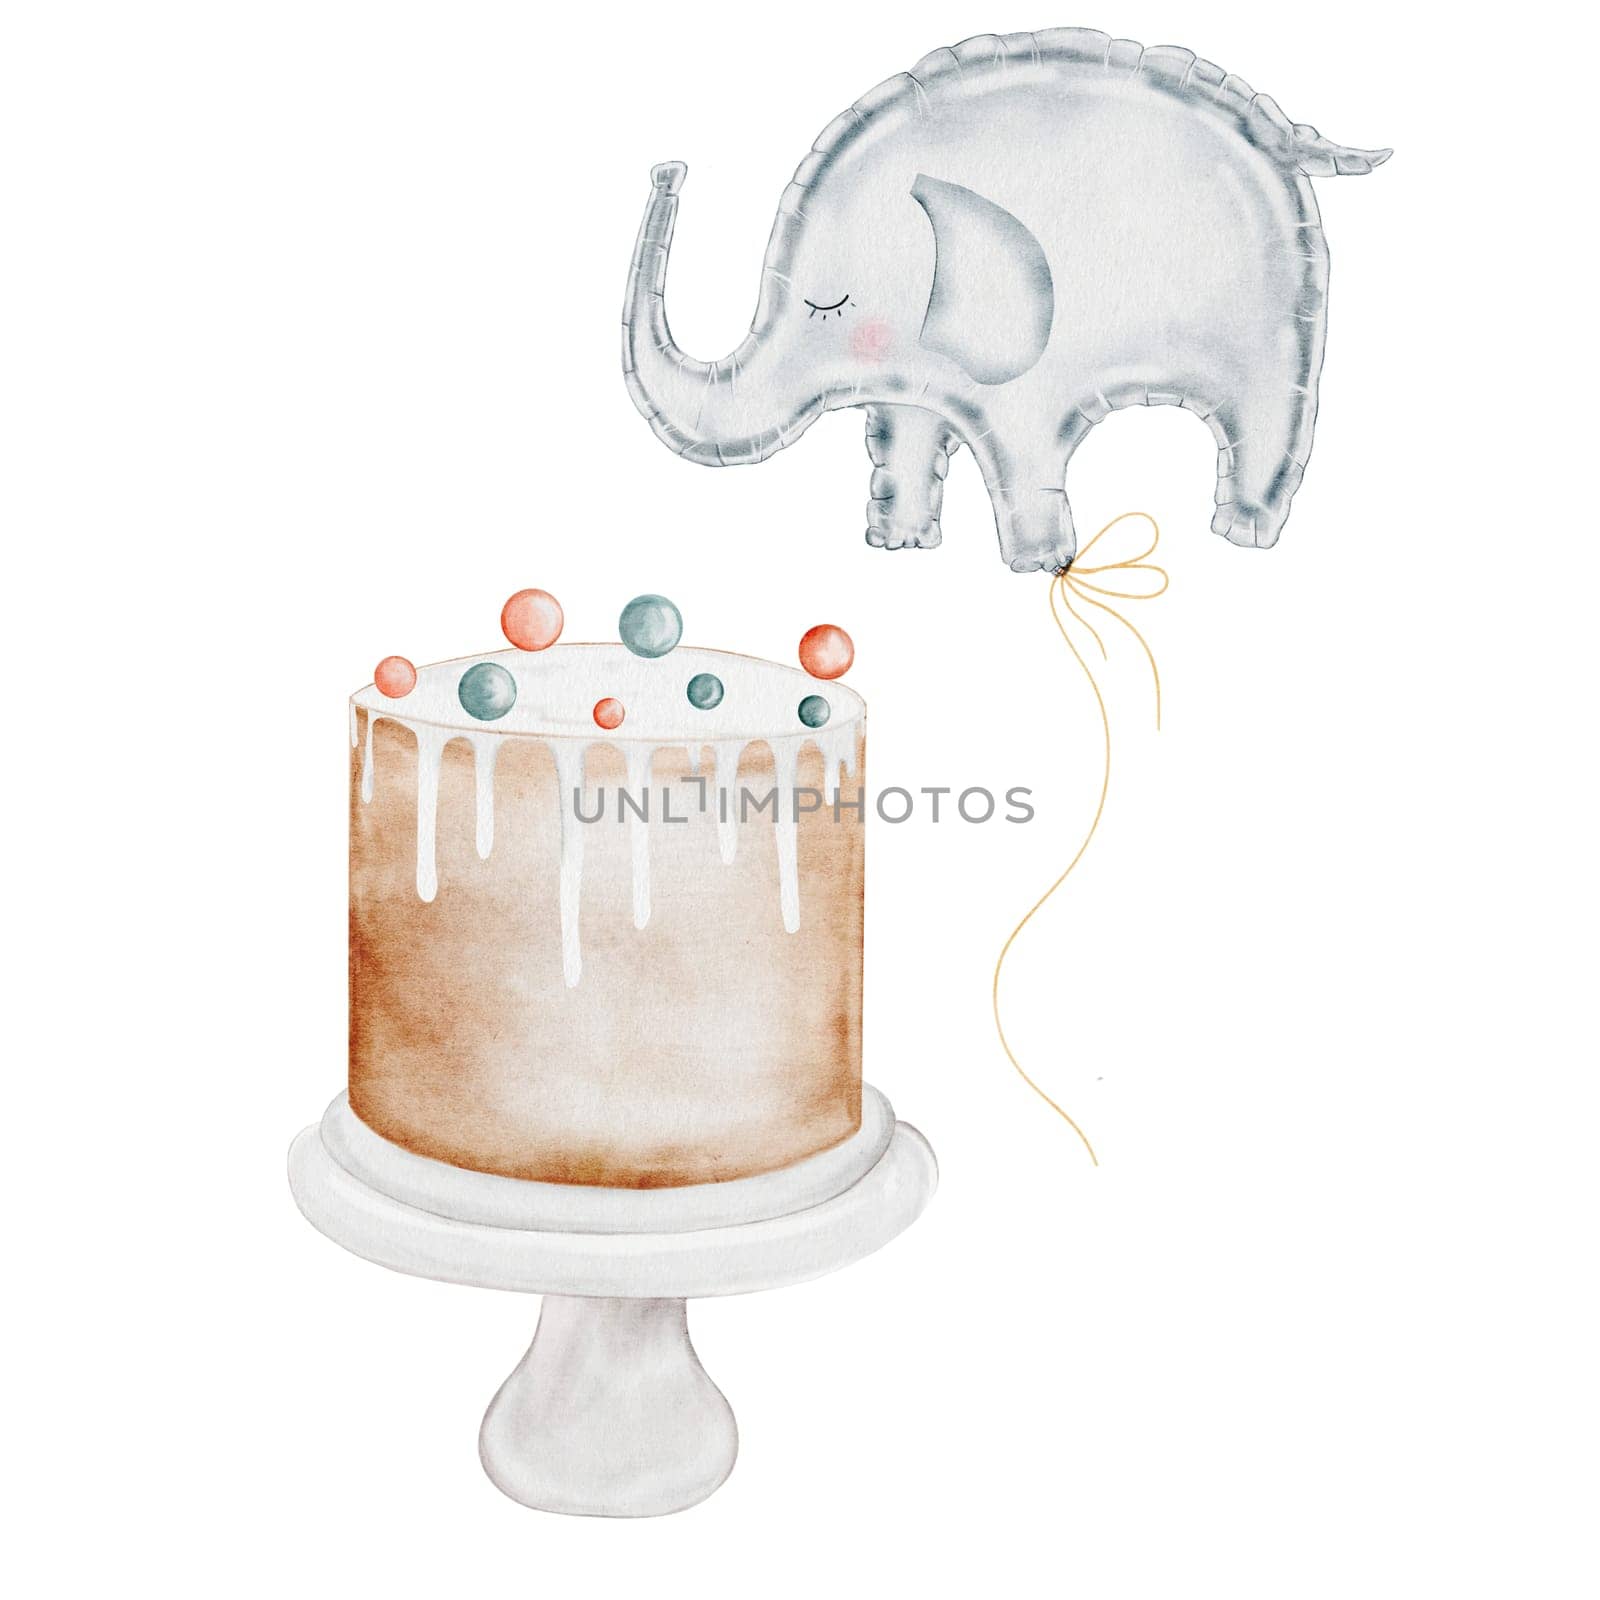 Birthday cake watercolor. Vintage illustration hand drawing of a holiday pie. Clip art isolated on white background sweet pastries. Ideal for designing baby shower and birthday cards and invitations. High quality photo